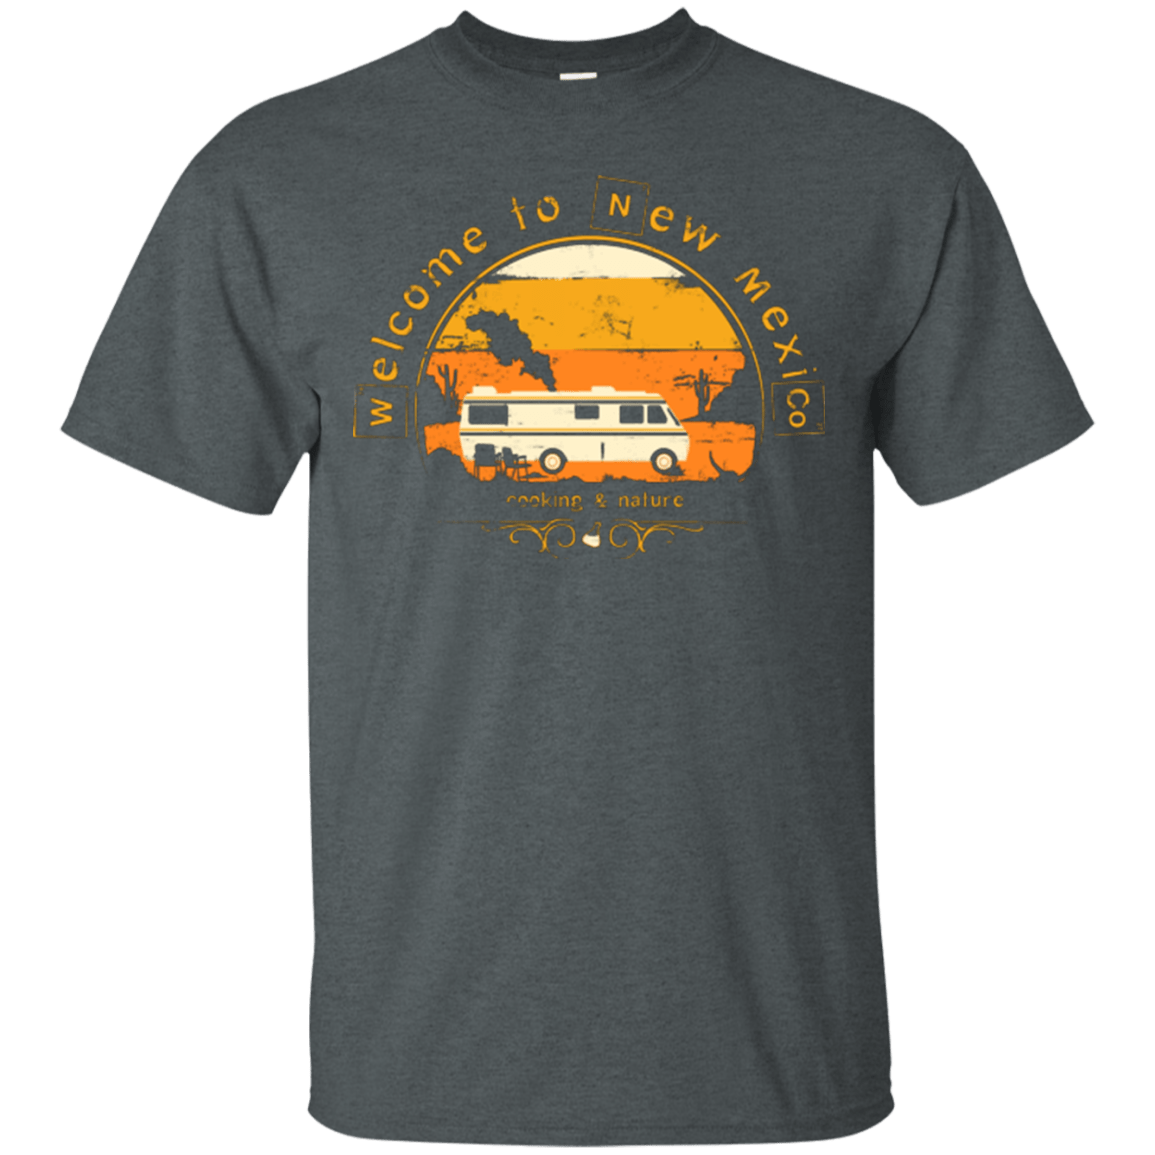 T-Shirts Dark Heather / Small Welcome to New Mexico T-Shirt